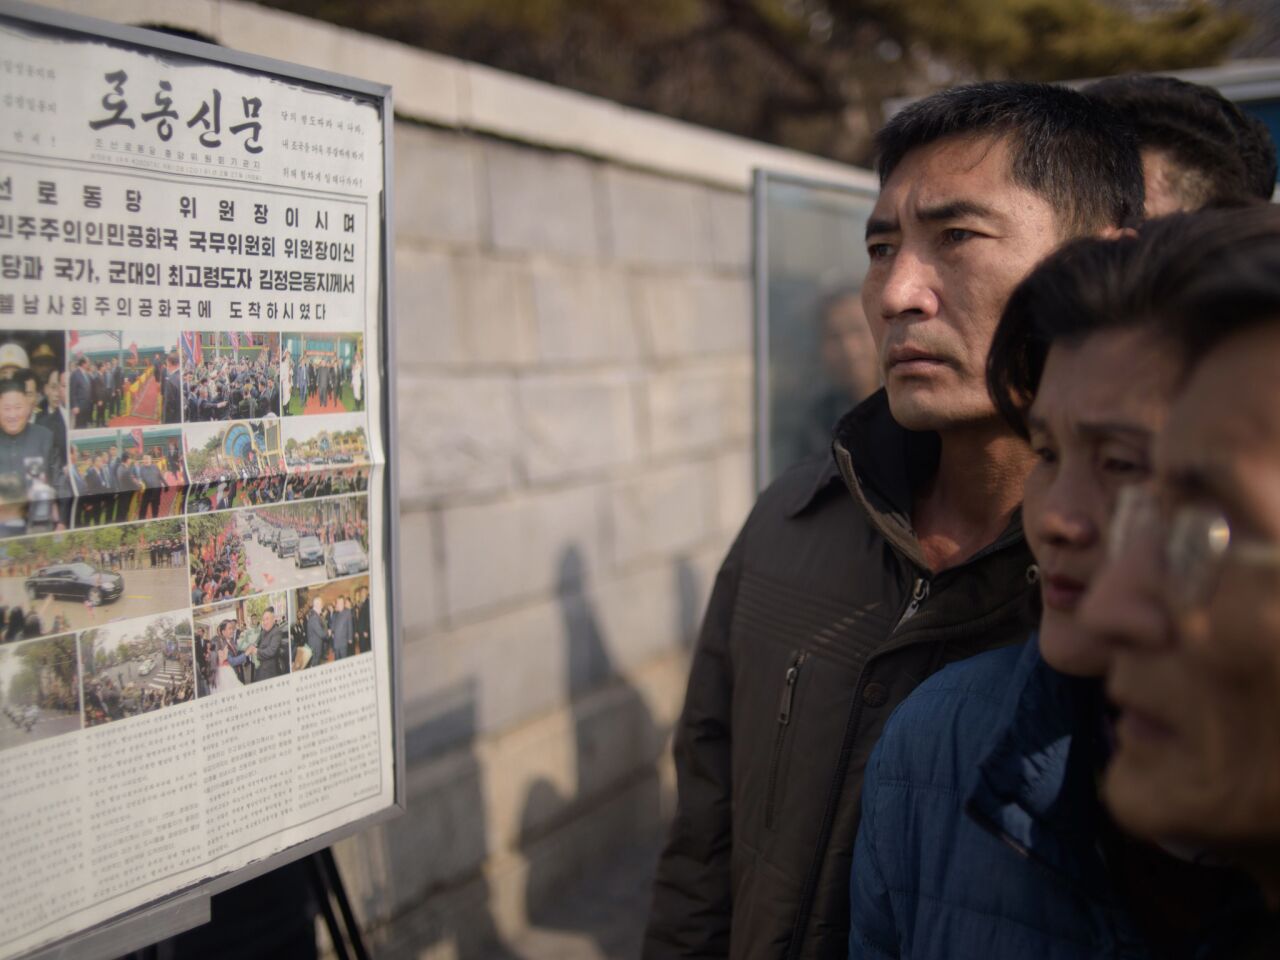 North Koreans in Pyongyang read a copy of the Rodong Sinmun newspaper showing coverage of leader Kim Jong Un arriving in Vietnam ahead of a Hanoi summit with Presiden Trump.